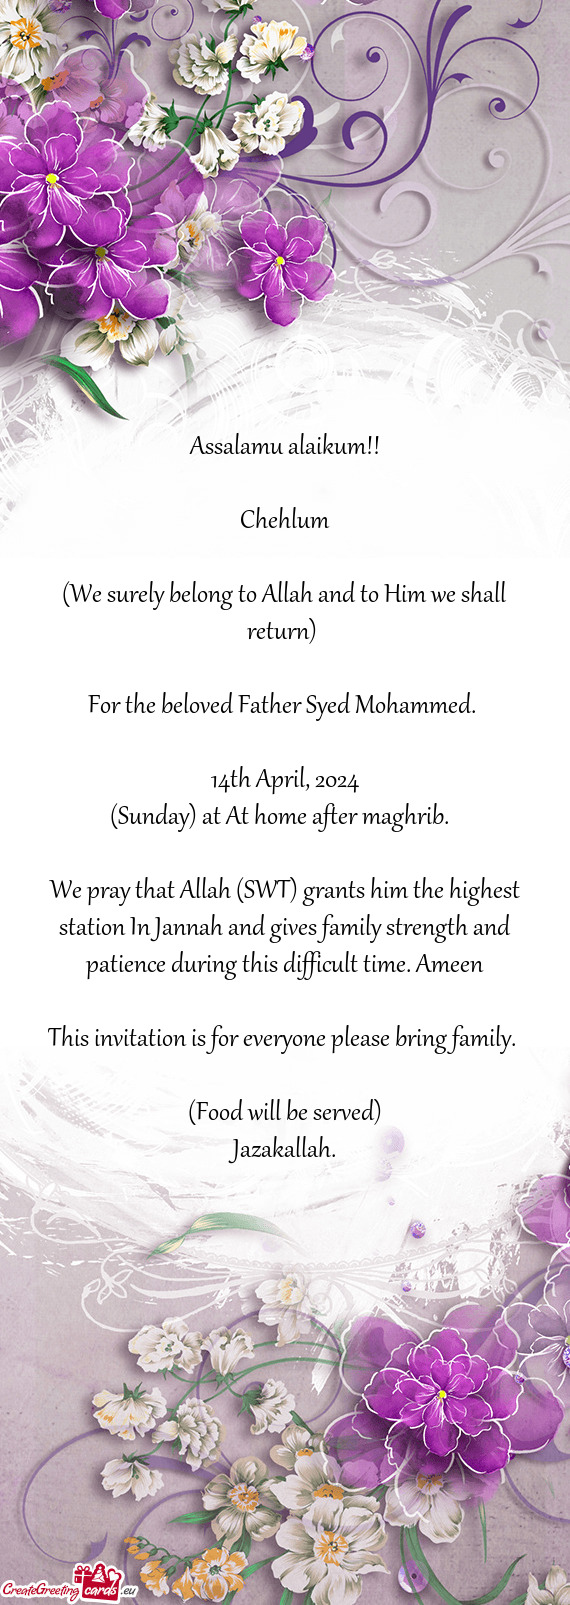 For the beloved Father Syed Mohammed